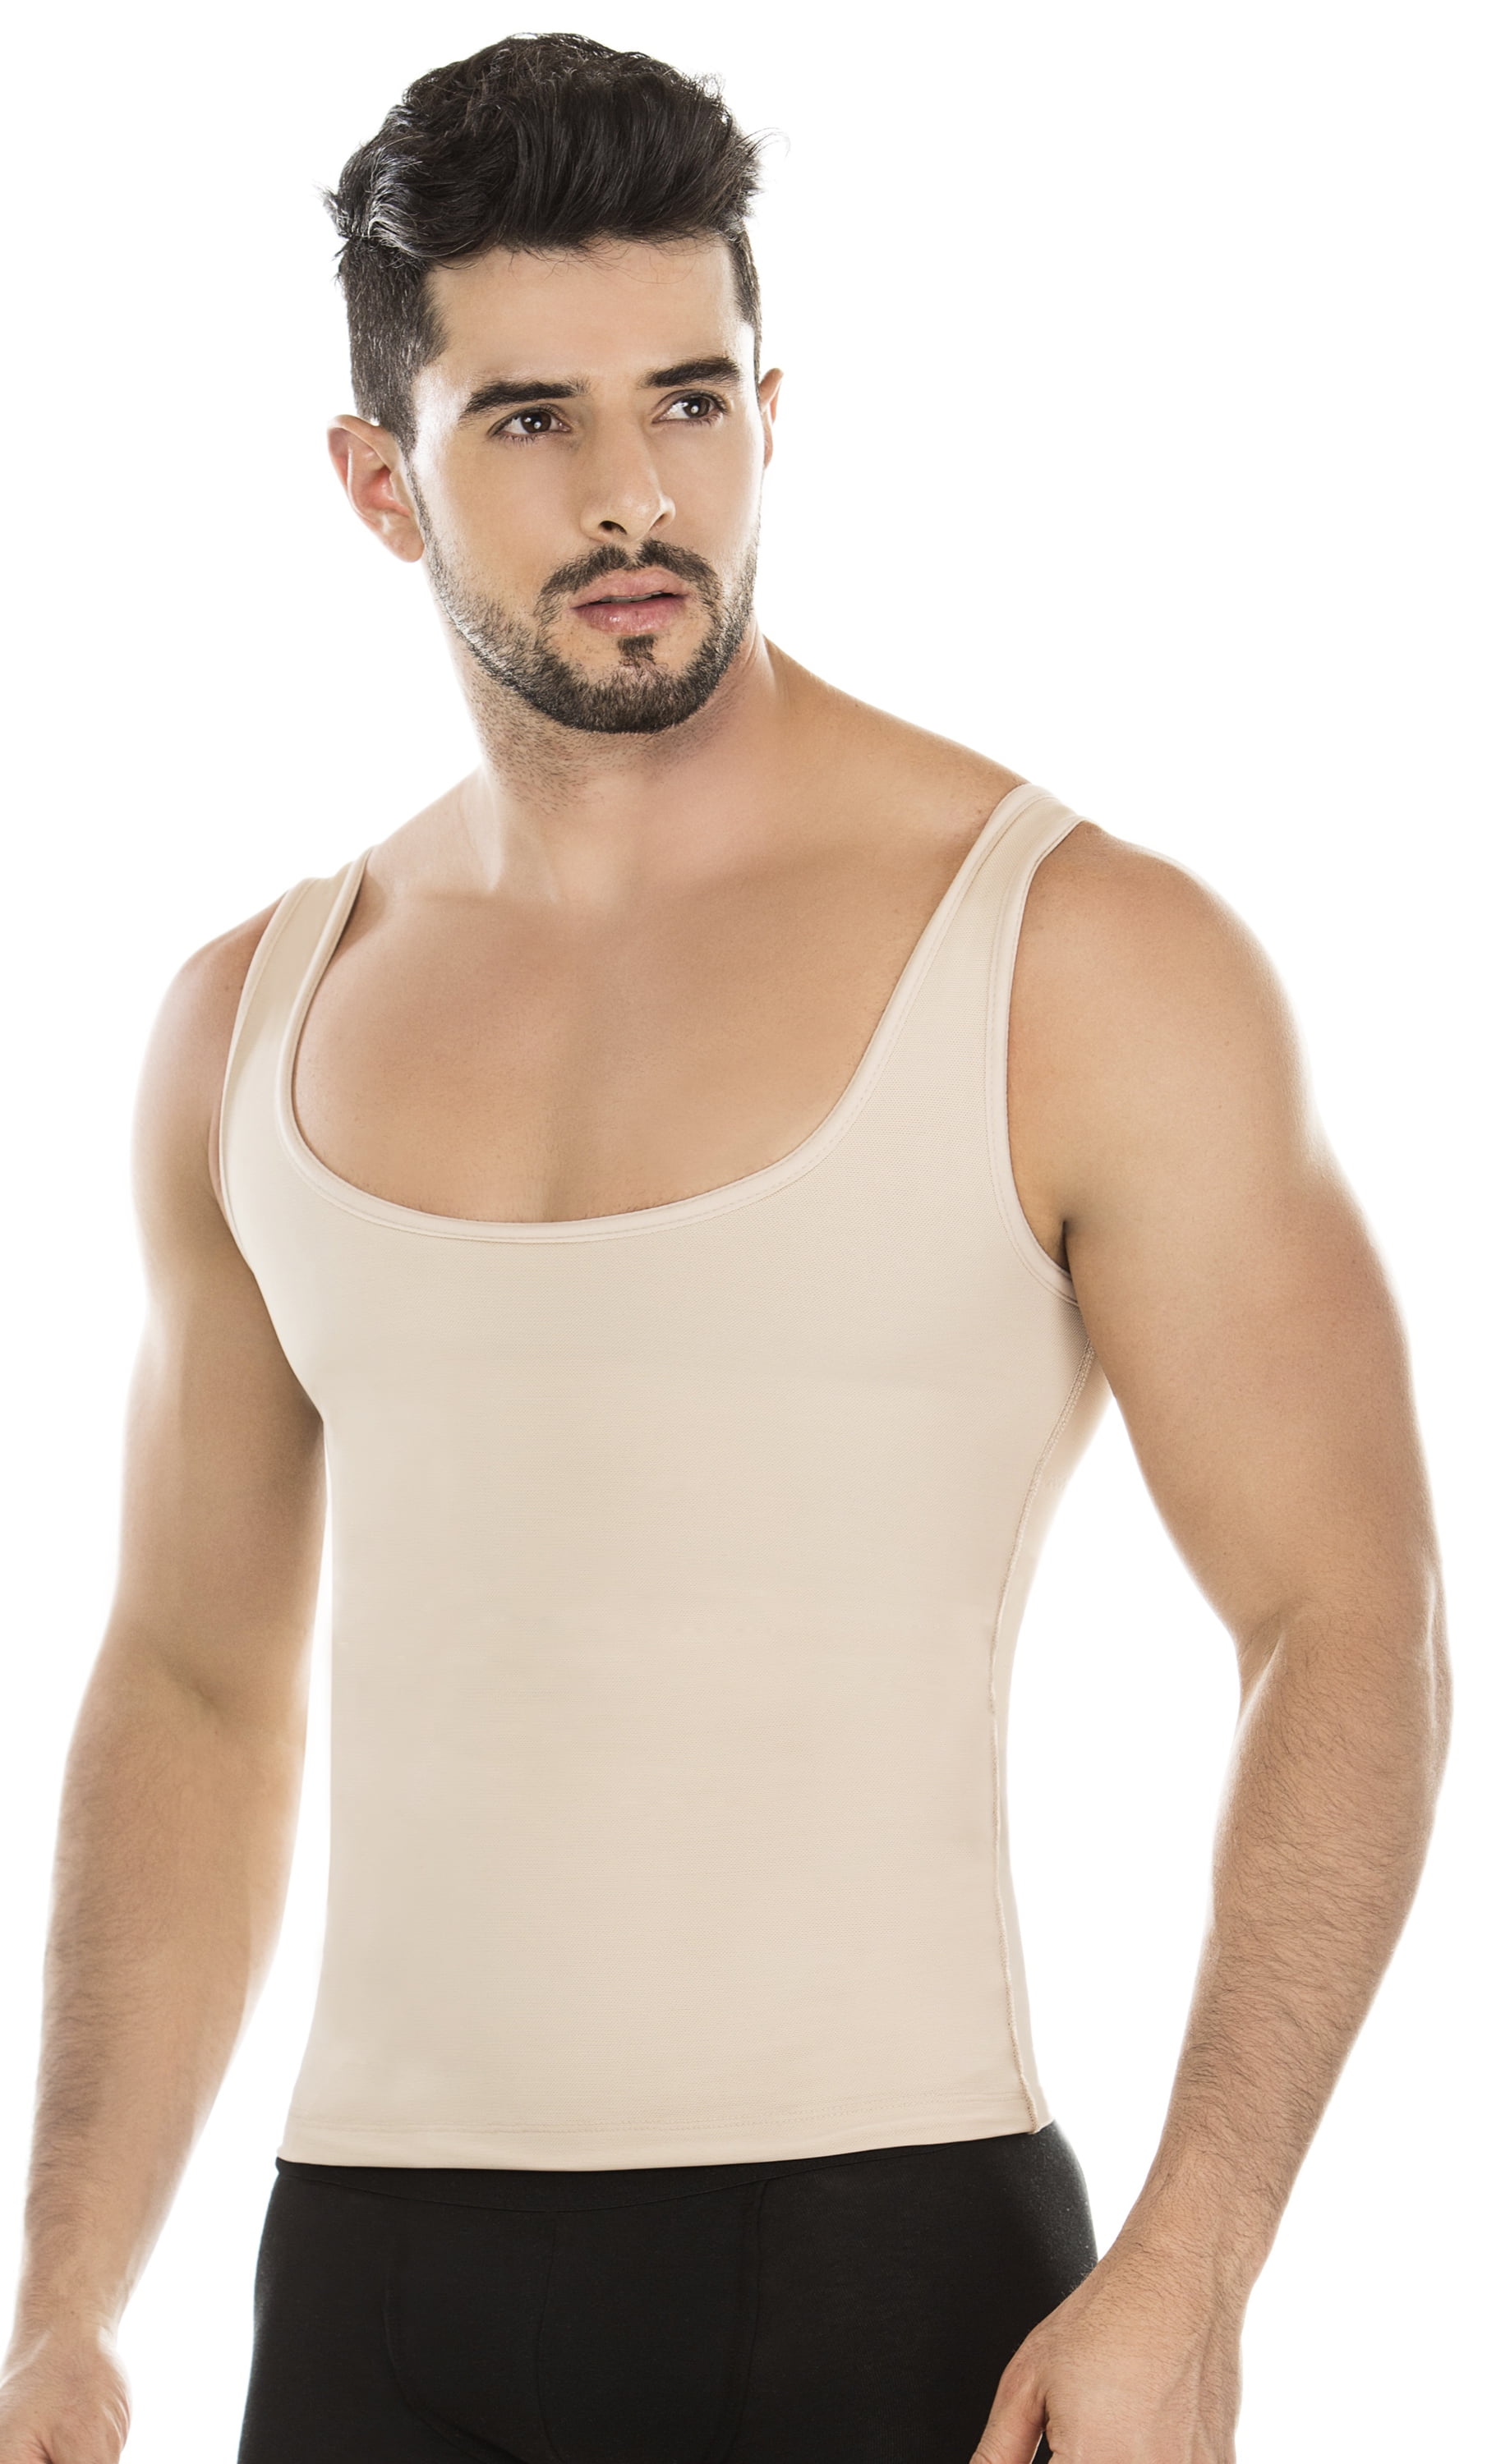 ShapEager Men's Body Shaper Extreme Shaper Thermal T-Shirt Slimming Firm  Control Shapewear Body Briefer Faja Moldeadora Colombiana